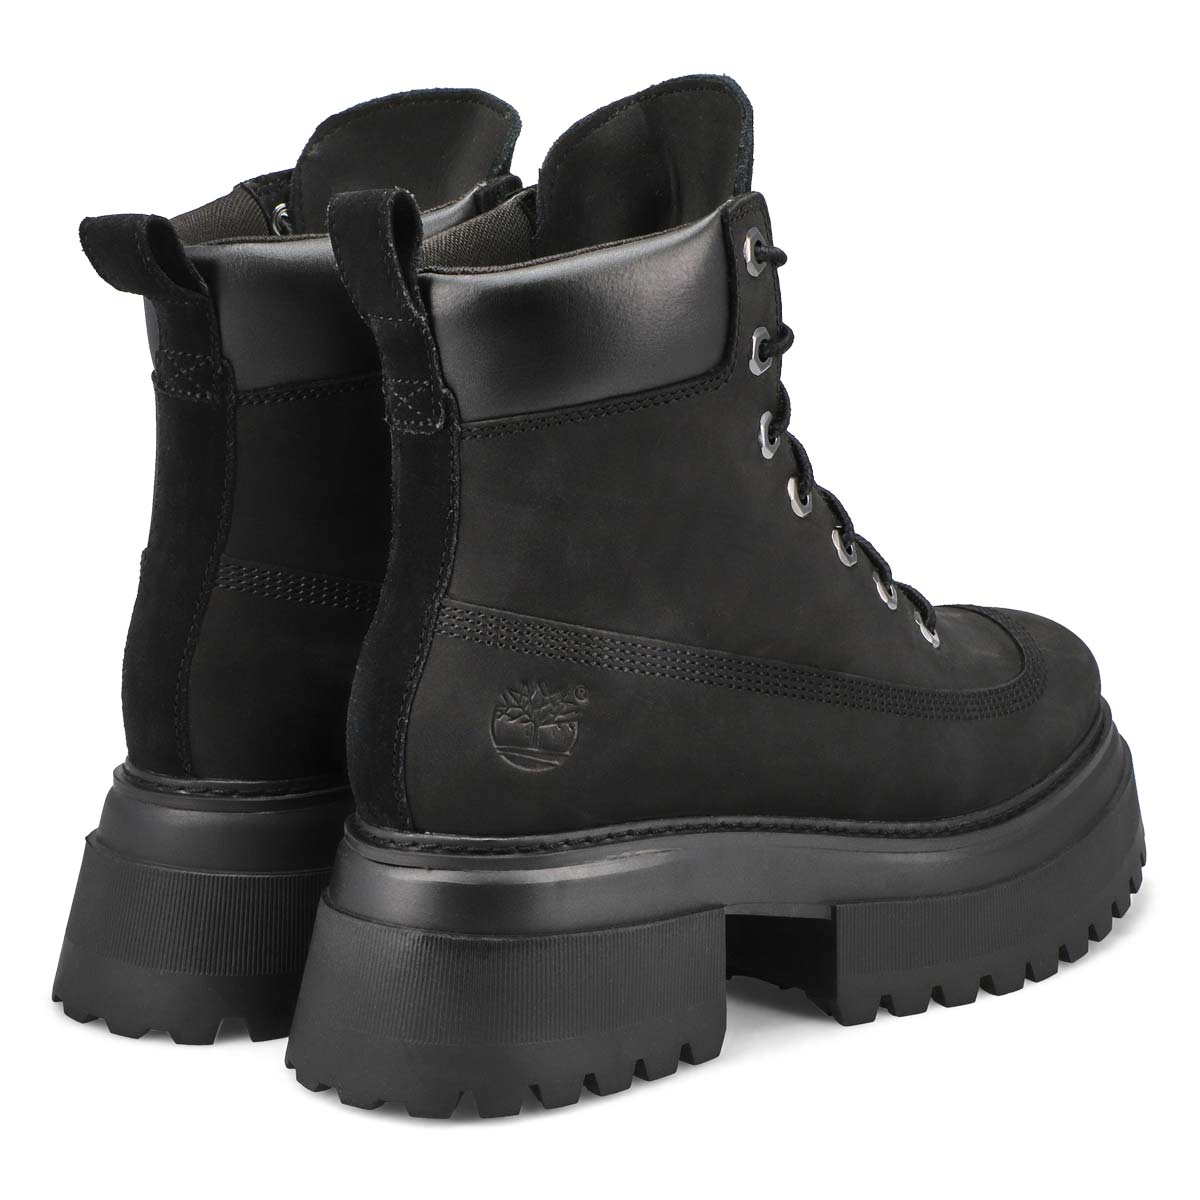 Women's Sky 6 Lace Up Boot - Black